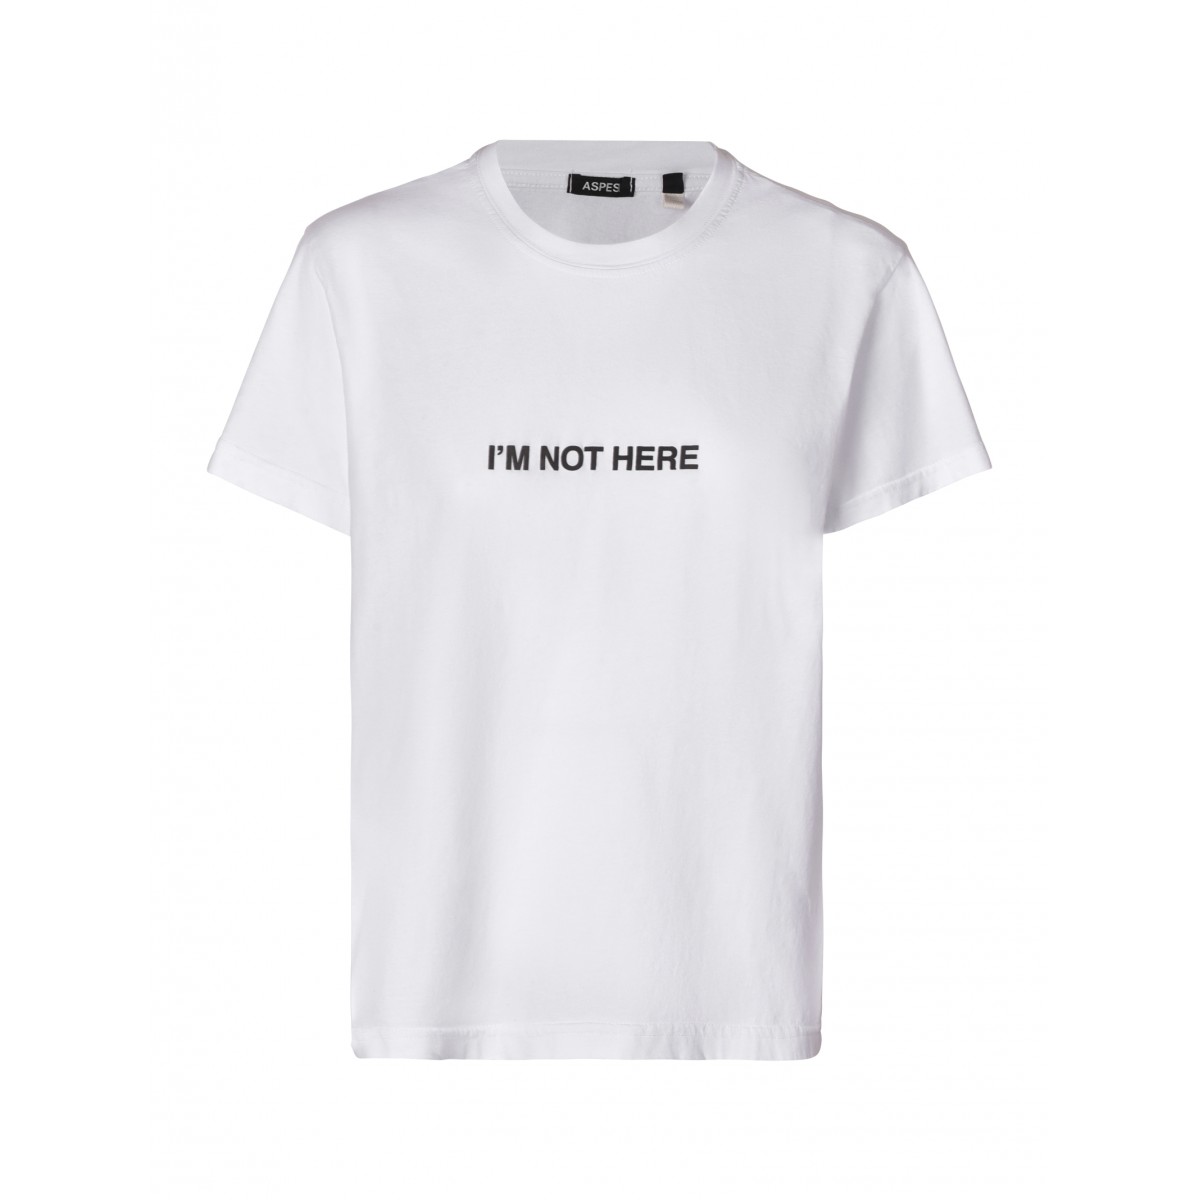 T-shirt I'm not here